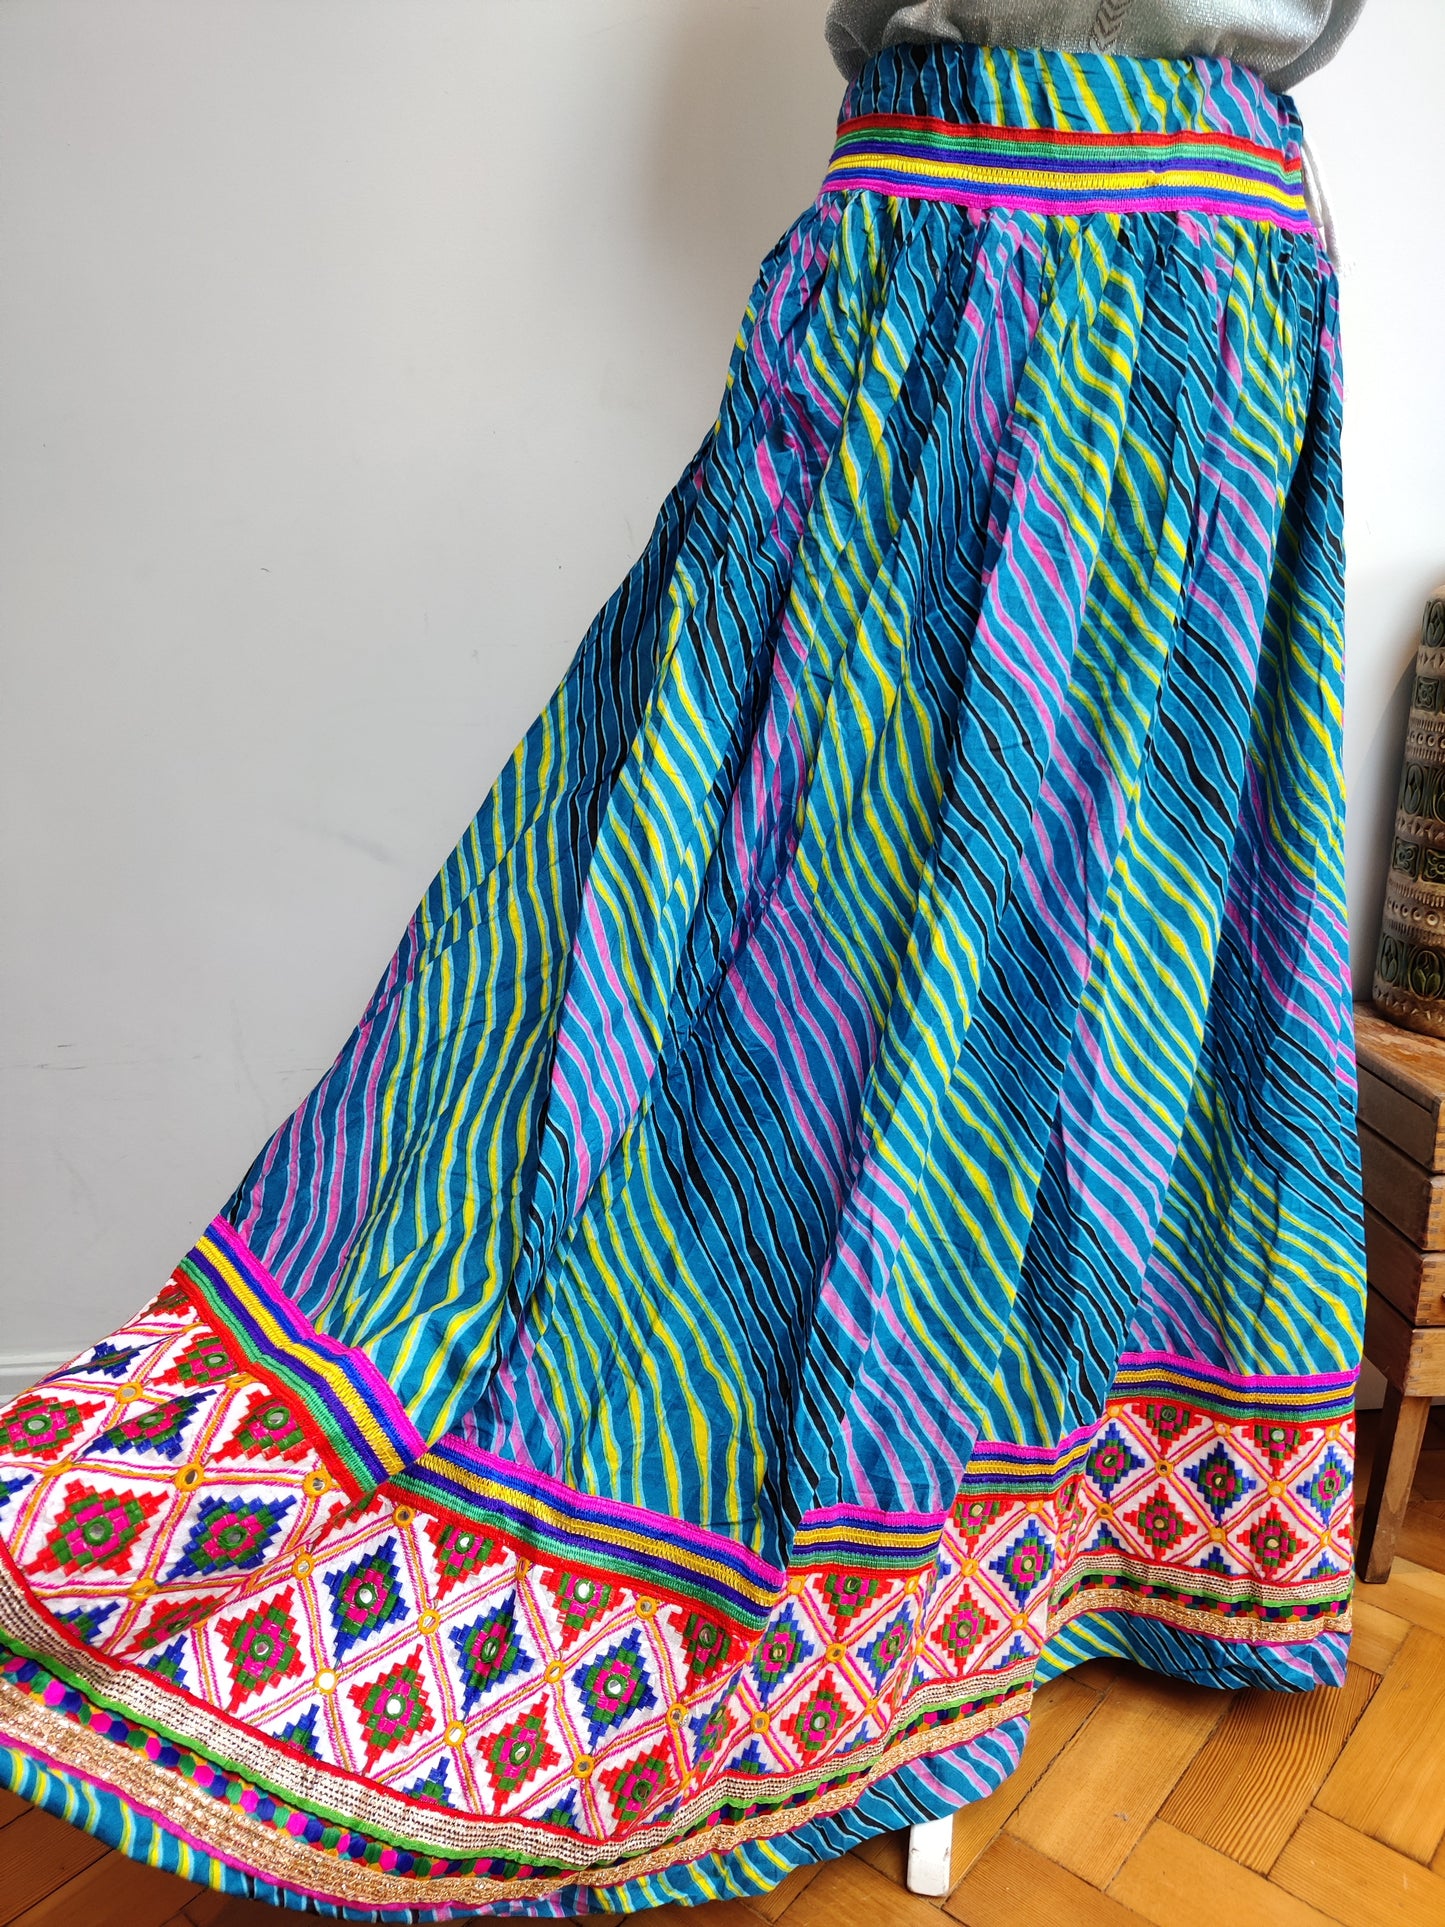 Full skirt with colourful embroidery.